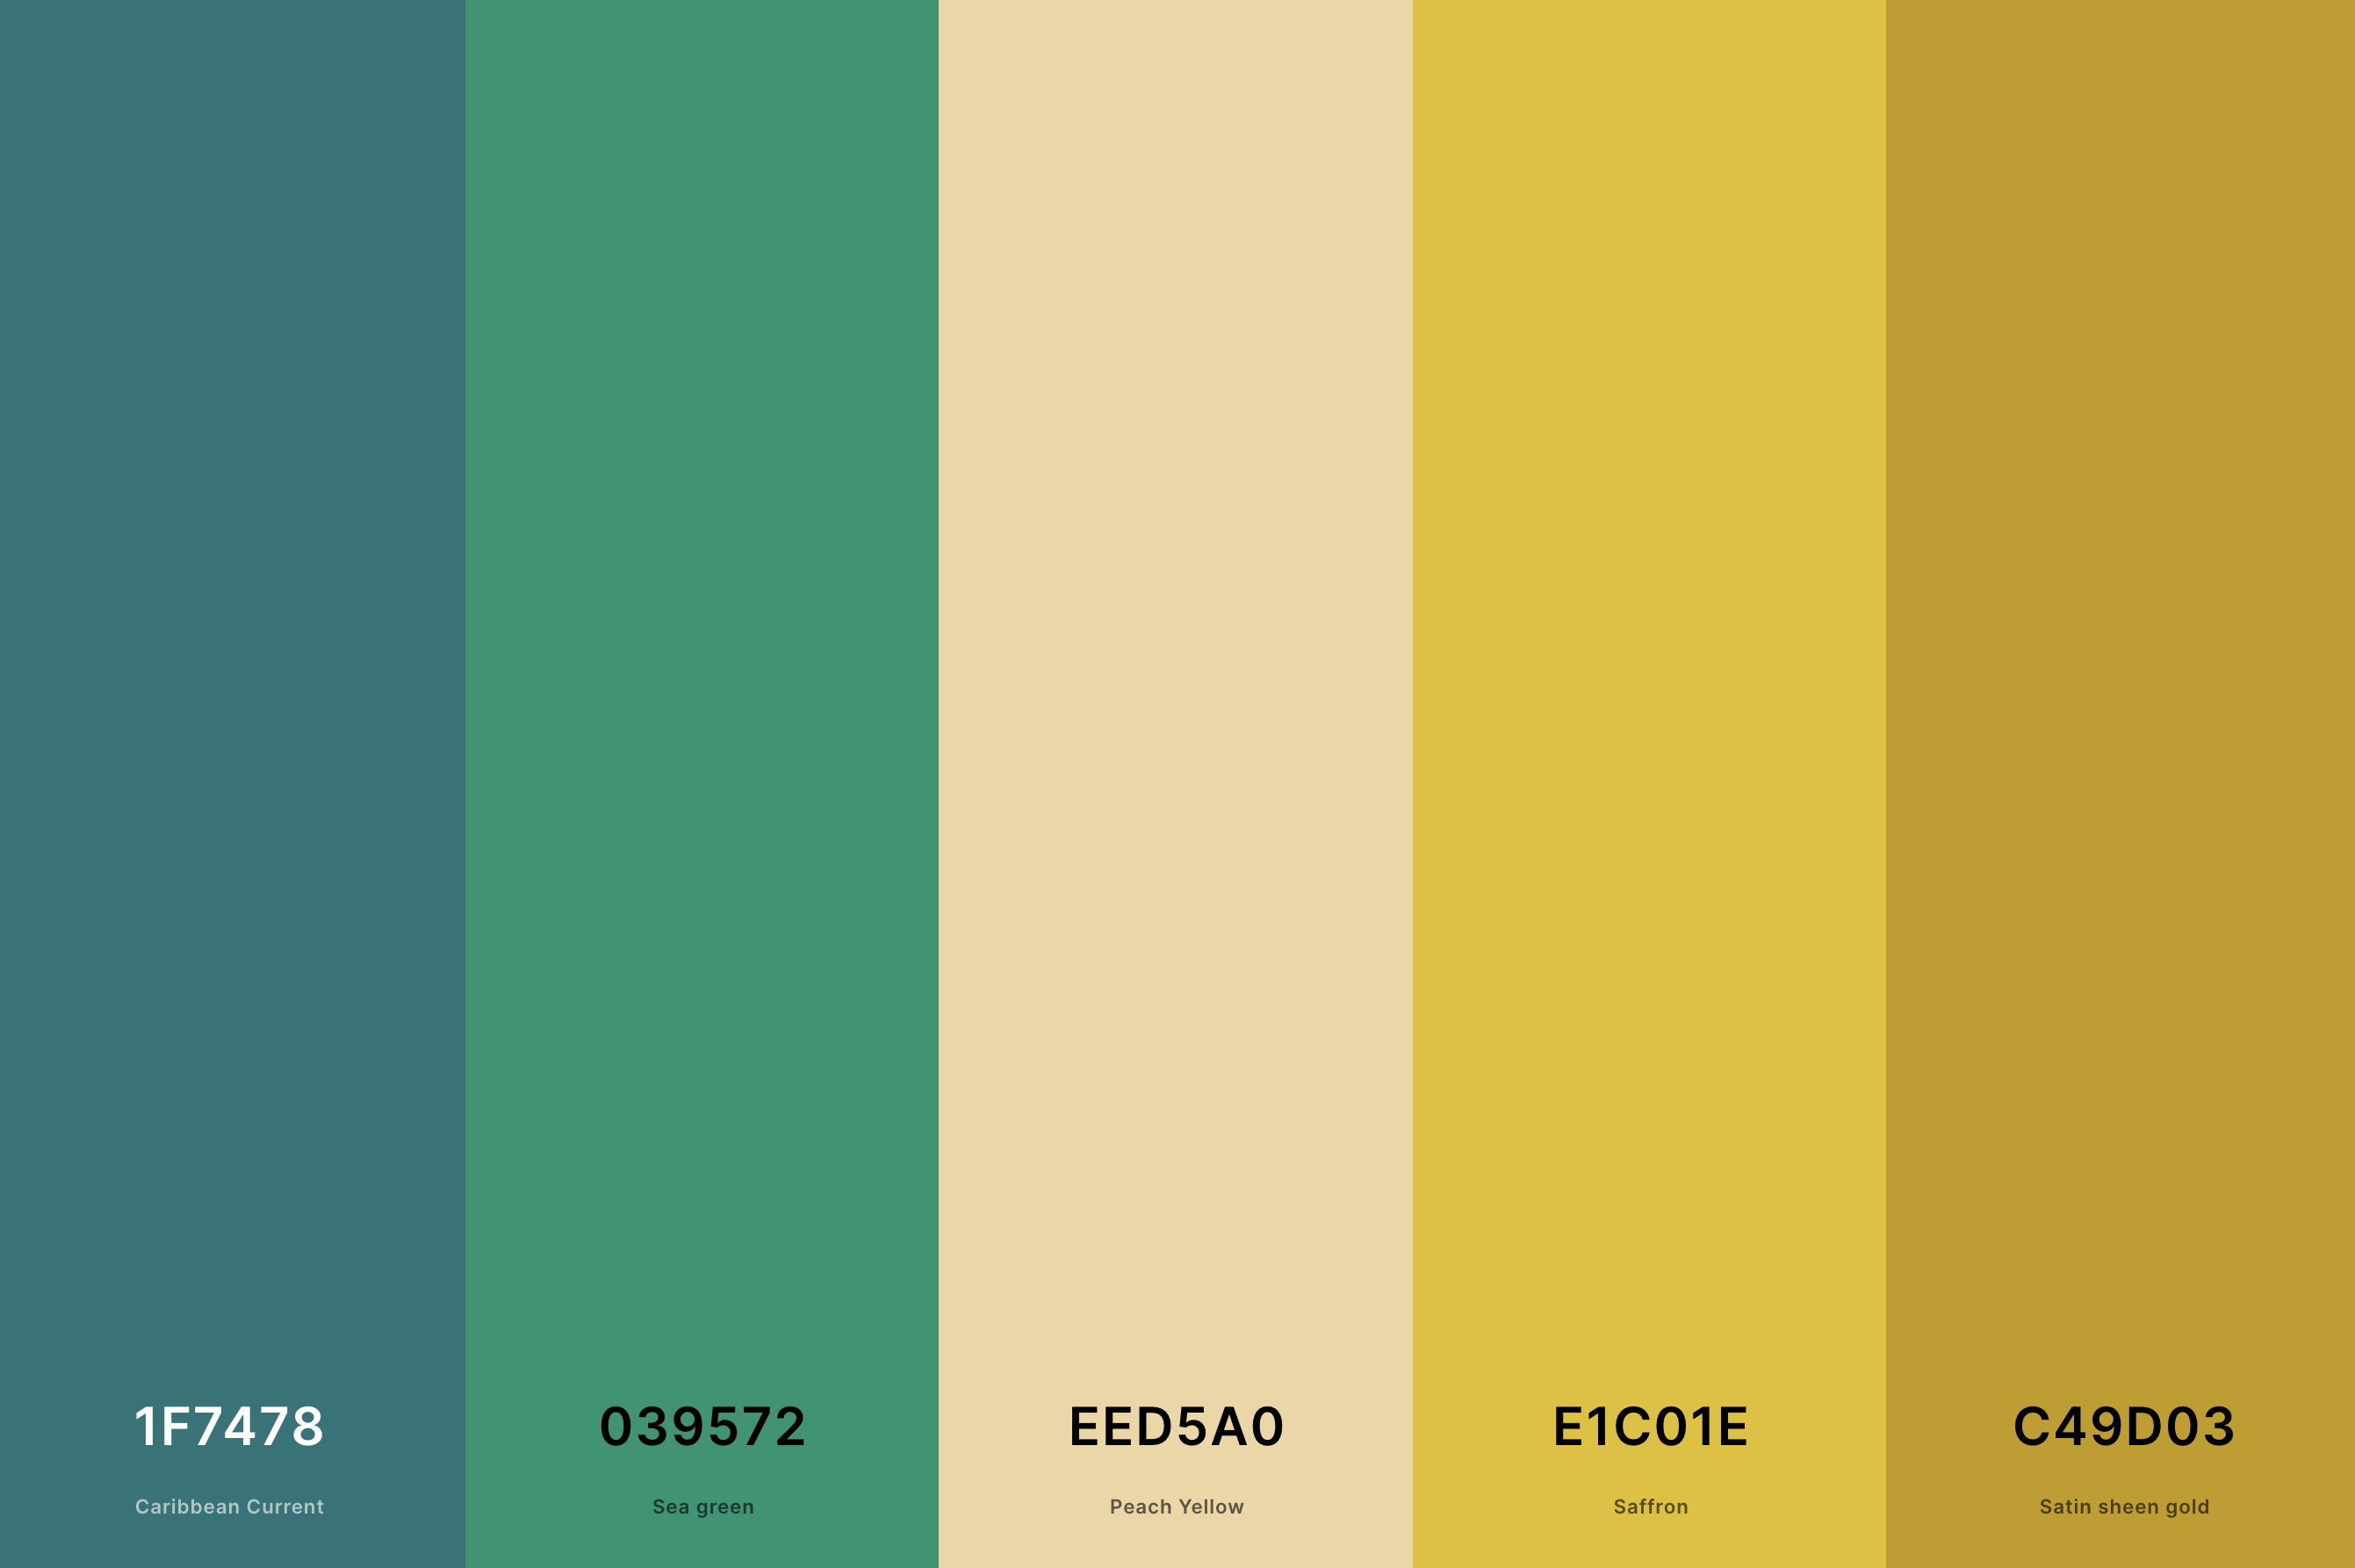 19. Emerald Green And Gold Color Palette Color Palette with Caribbean Current (Hex #1F7478) + Sea Green (Hex #039572) + Peach Yellow (Hex #EED5A0) + Saffron (Hex #E1C01E) + Satin Sheen Gold (Hex #C49D03) Color Palette with Hex Codes